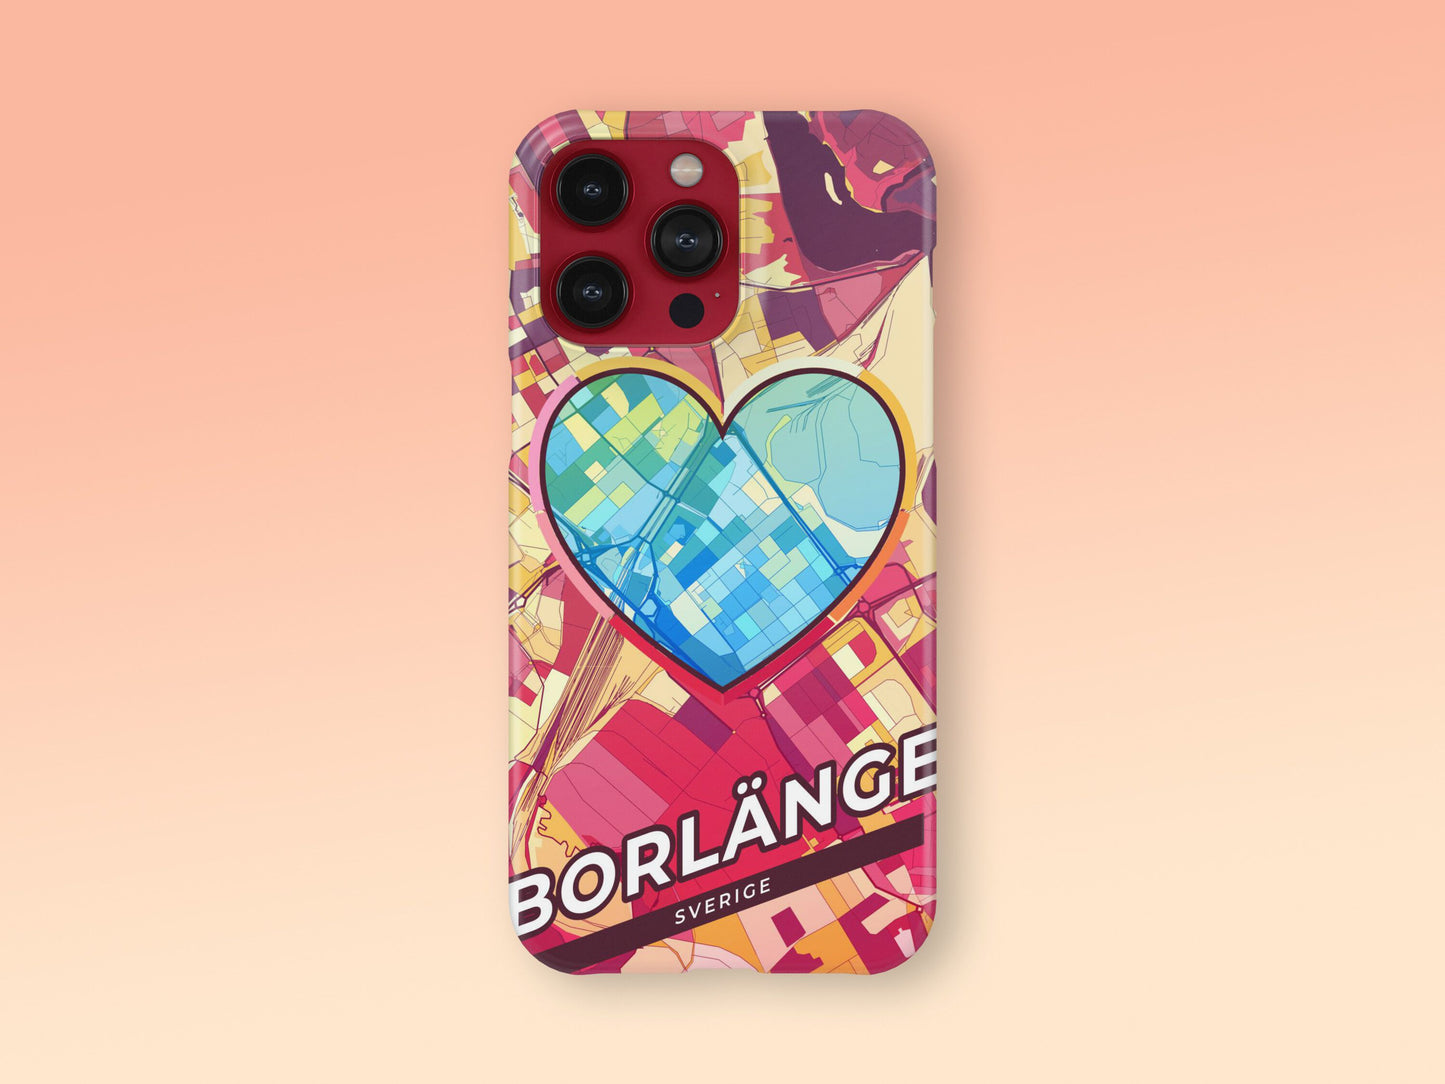 Borlänge Sweden slim phone case with colorful icon. Birthday, wedding or housewarming gift. Couple match cases. 2